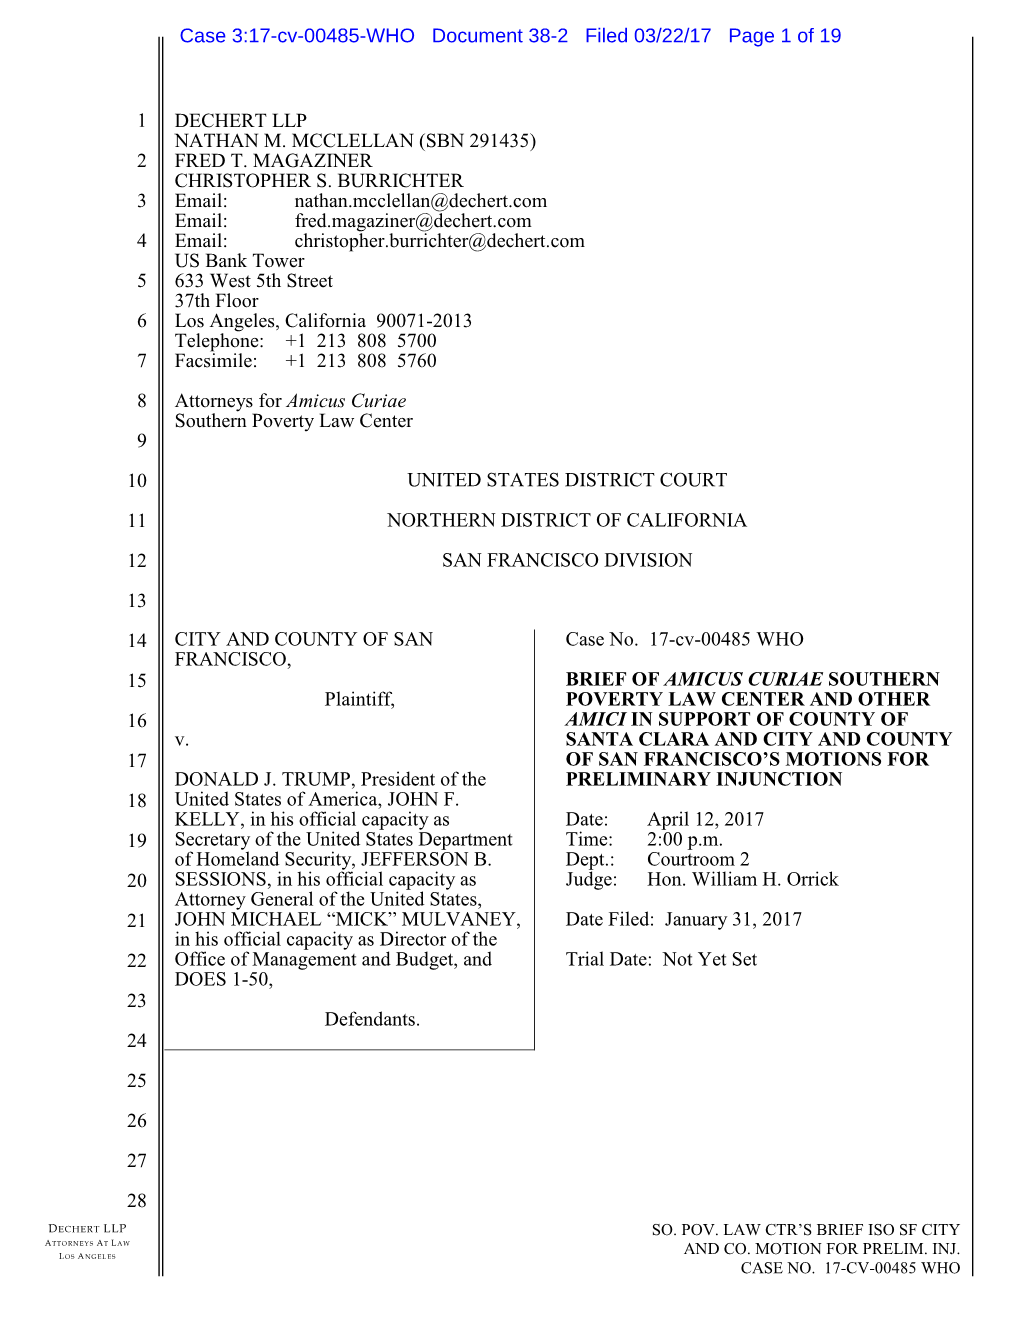 Case 3:17-Cv-00485-WHO Document 38-2 Filed 03/22/17 Page 1 of 19